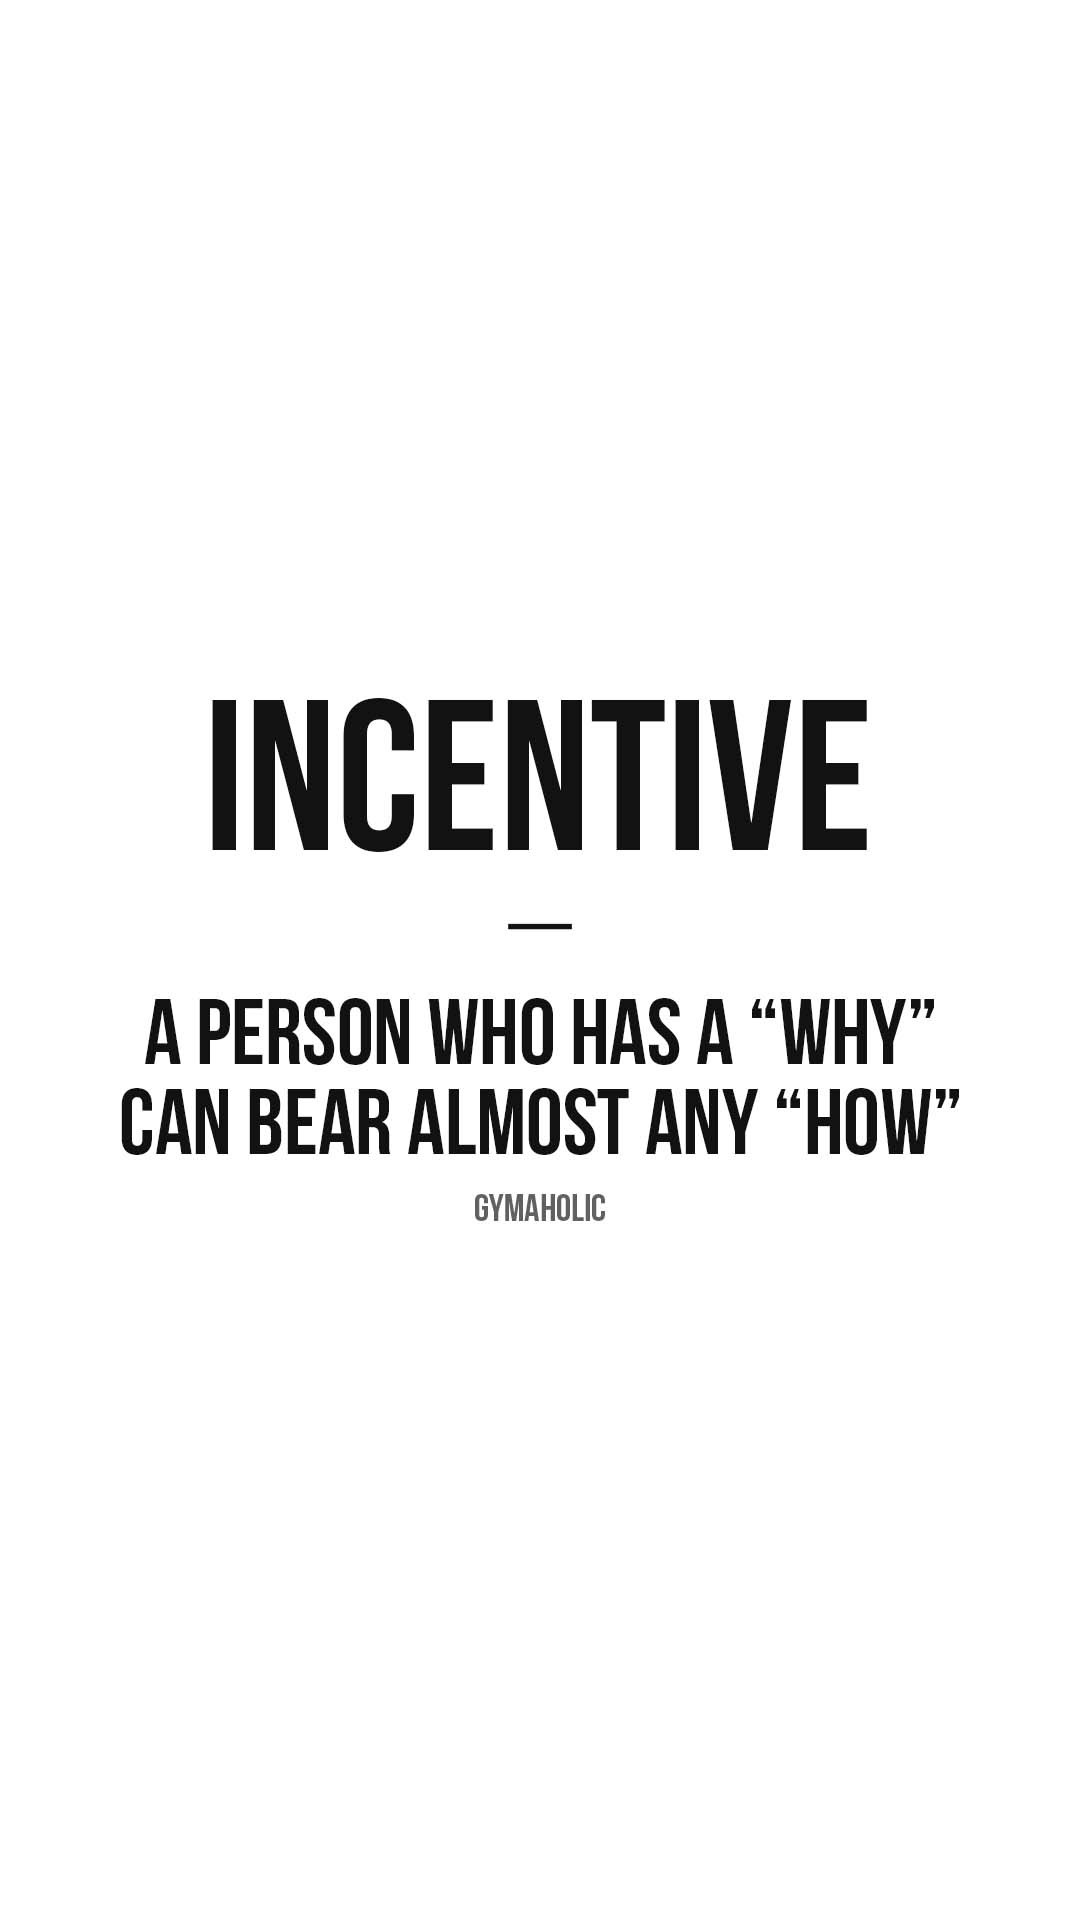 Incentive: a person who has a “why” can bear almost any “how”